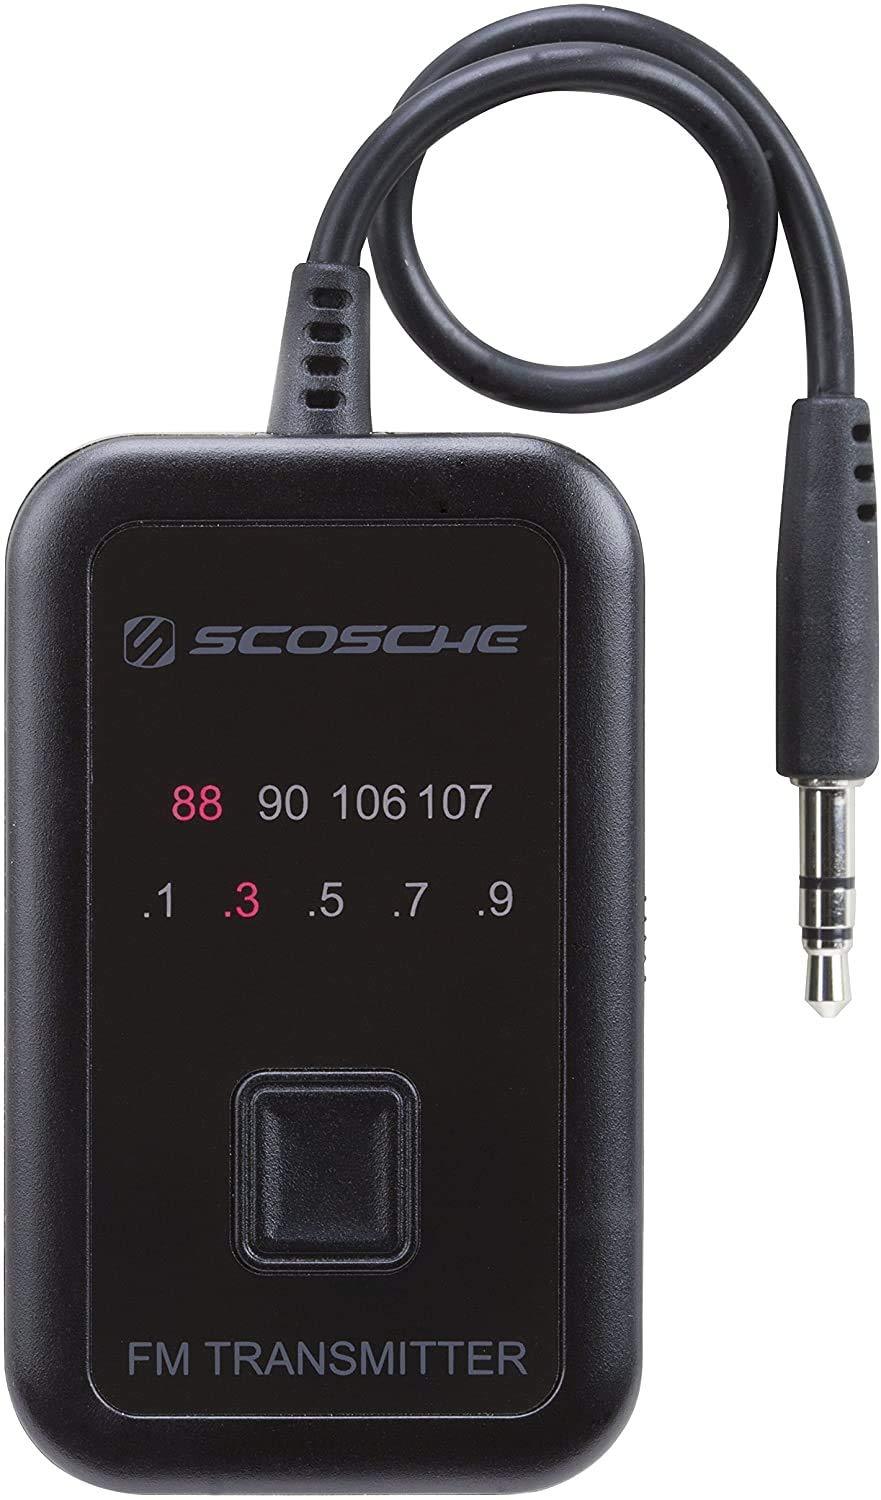 SCOSCHE FMT4R FM Transmitter with 20 Frequency Selections Portable Black